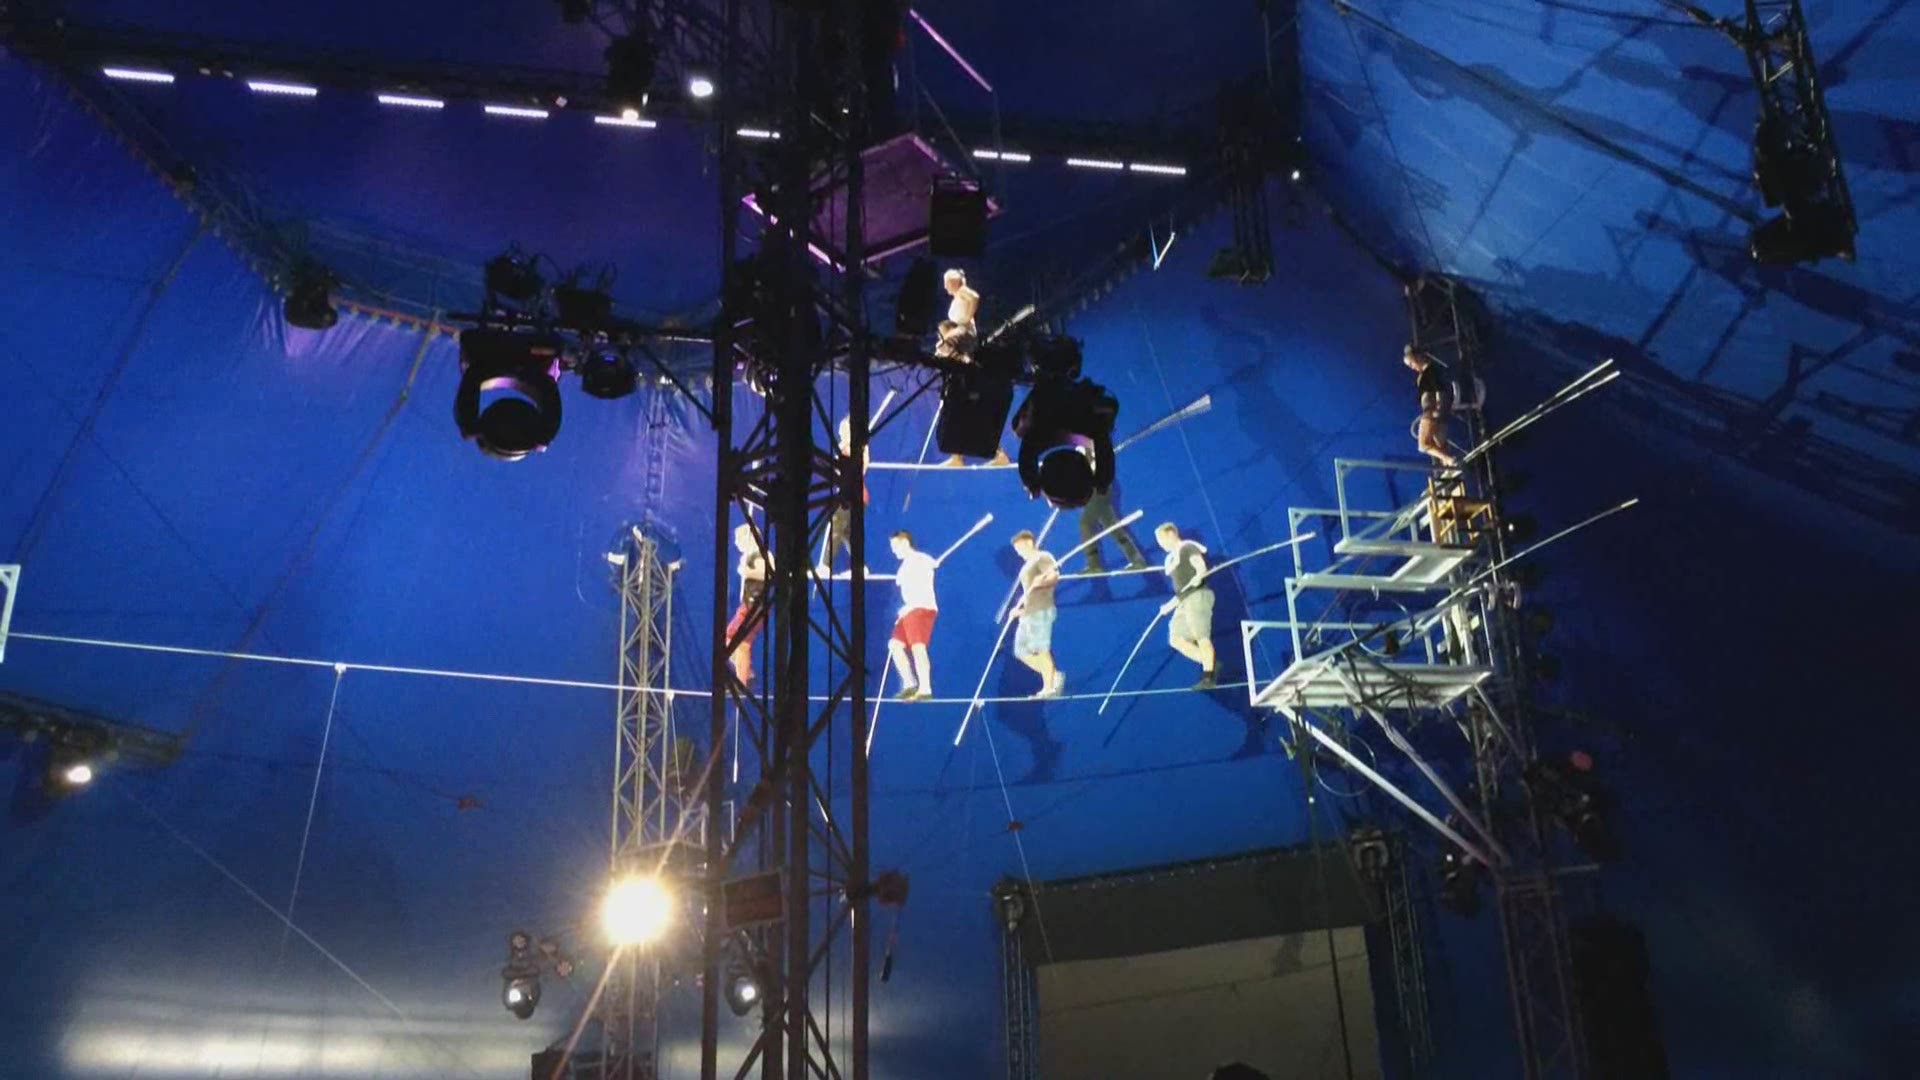 Video released by the Sarasota County Sheriff's Office shows five people being injured in a rehearsal of a circus act.